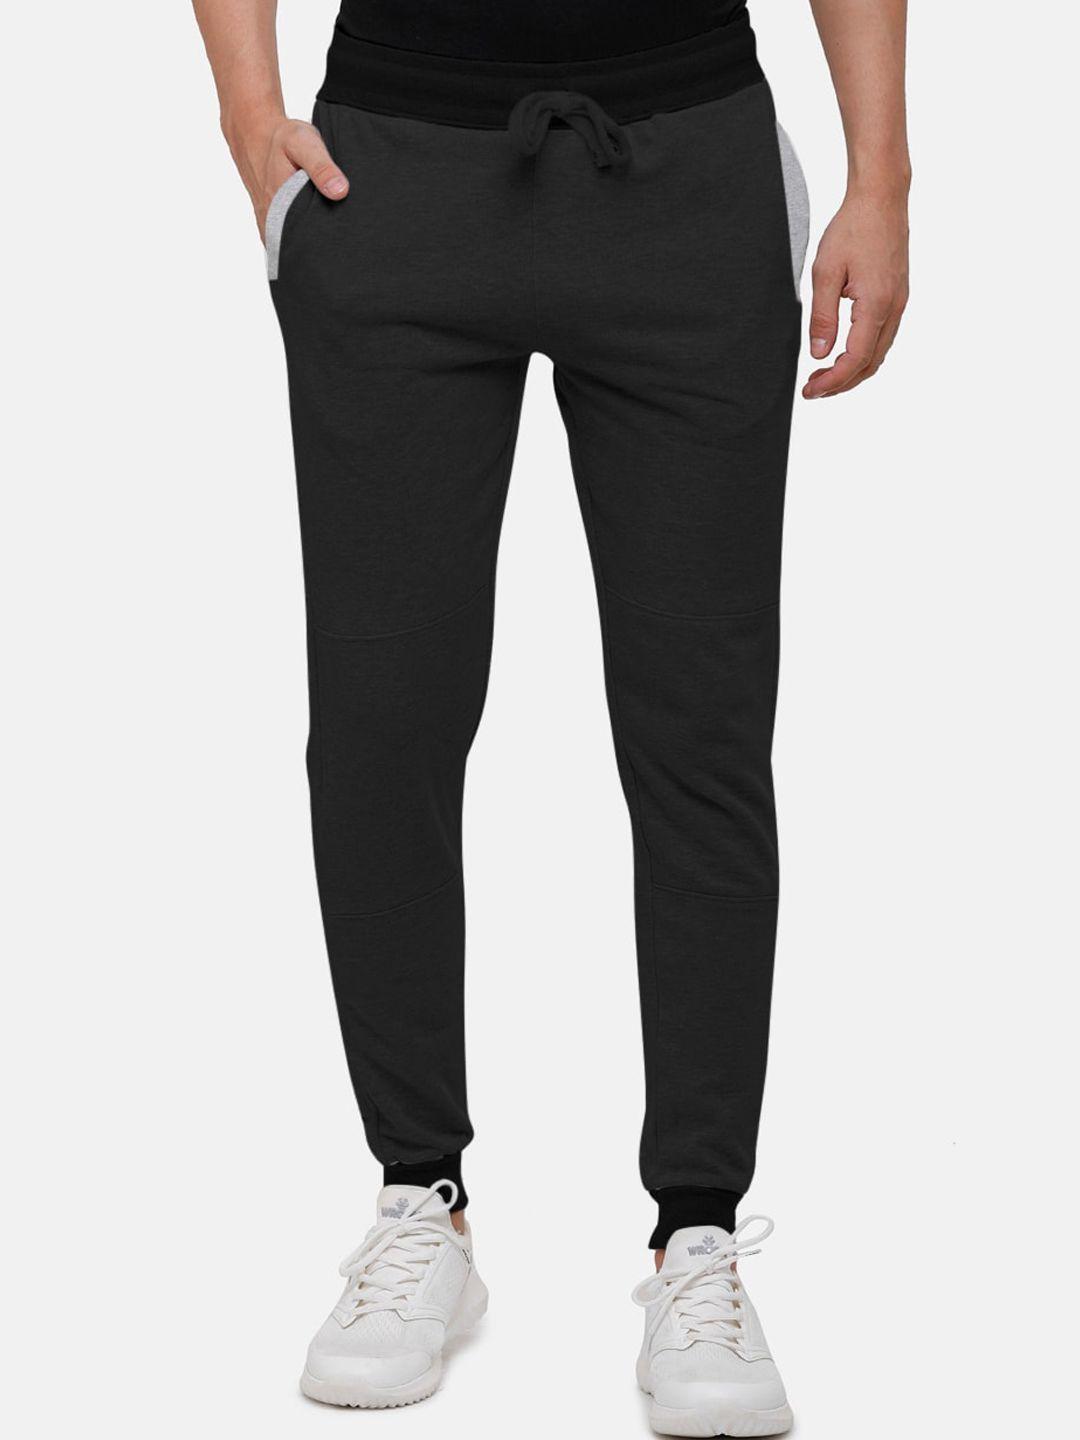 madsto men grey solid cotton joggers